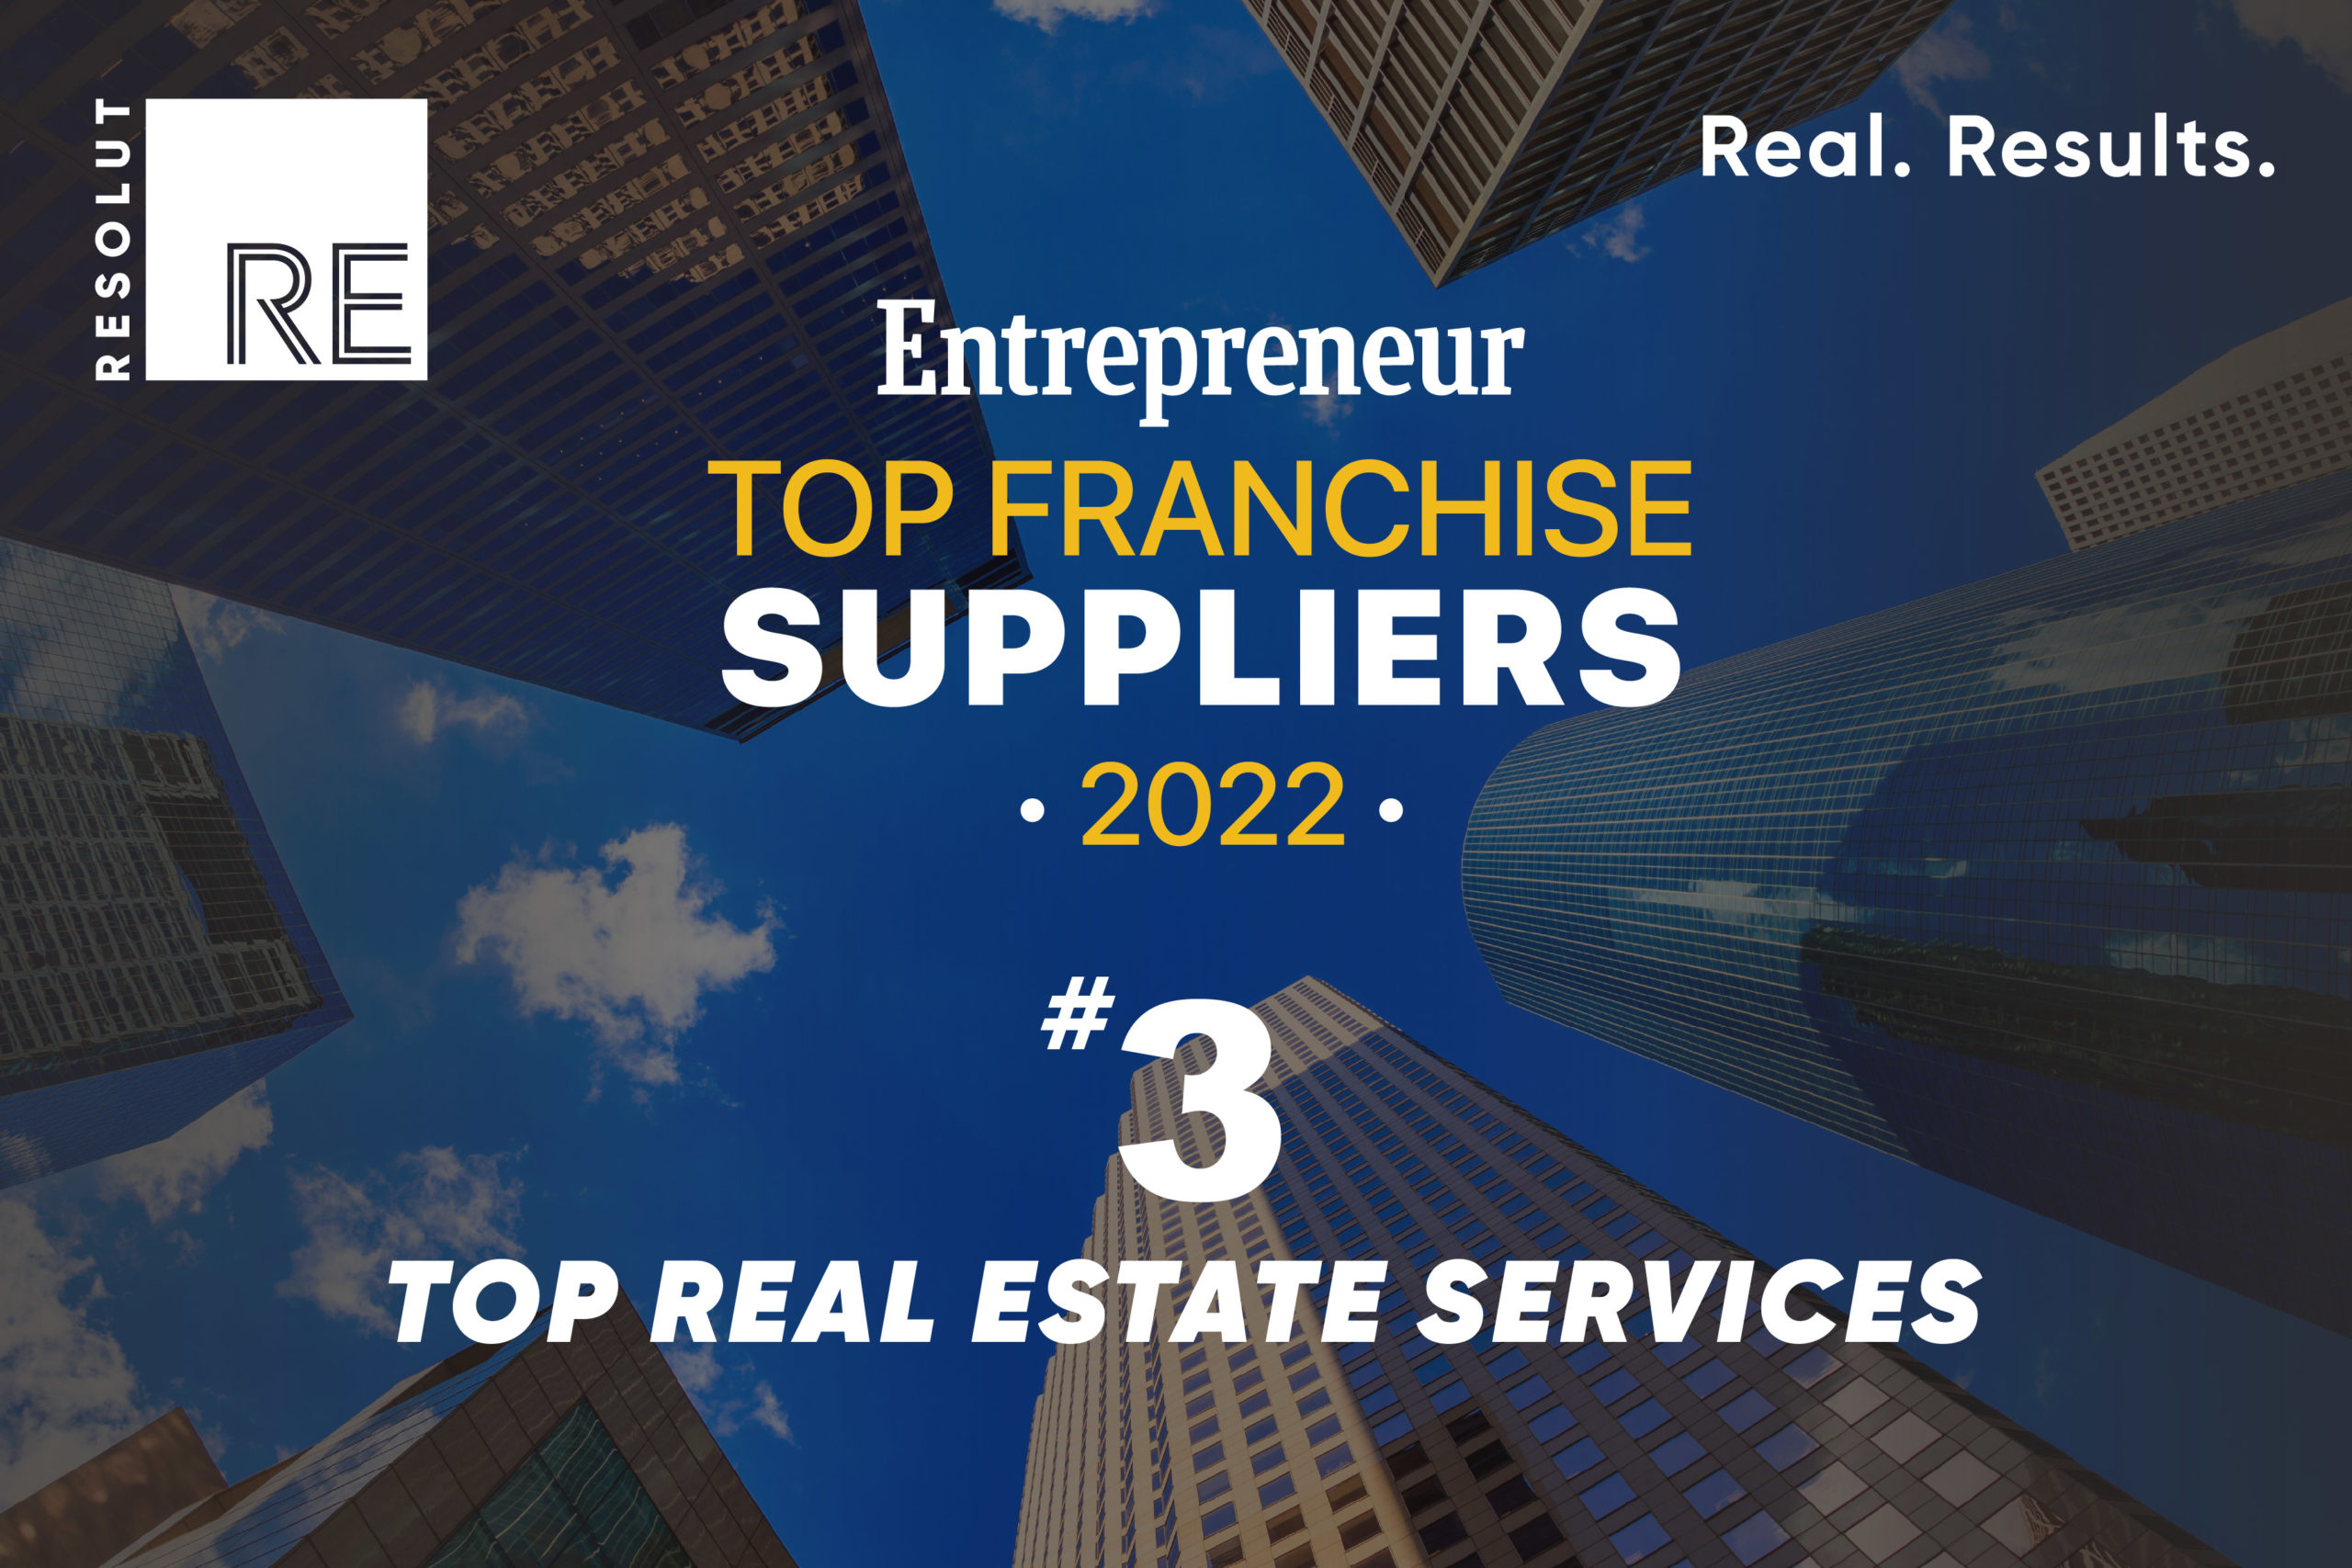 commercial-real-estate-resolut-re-named-to-2022-entrepreneur-top-franchise-suppliers-list-scaled